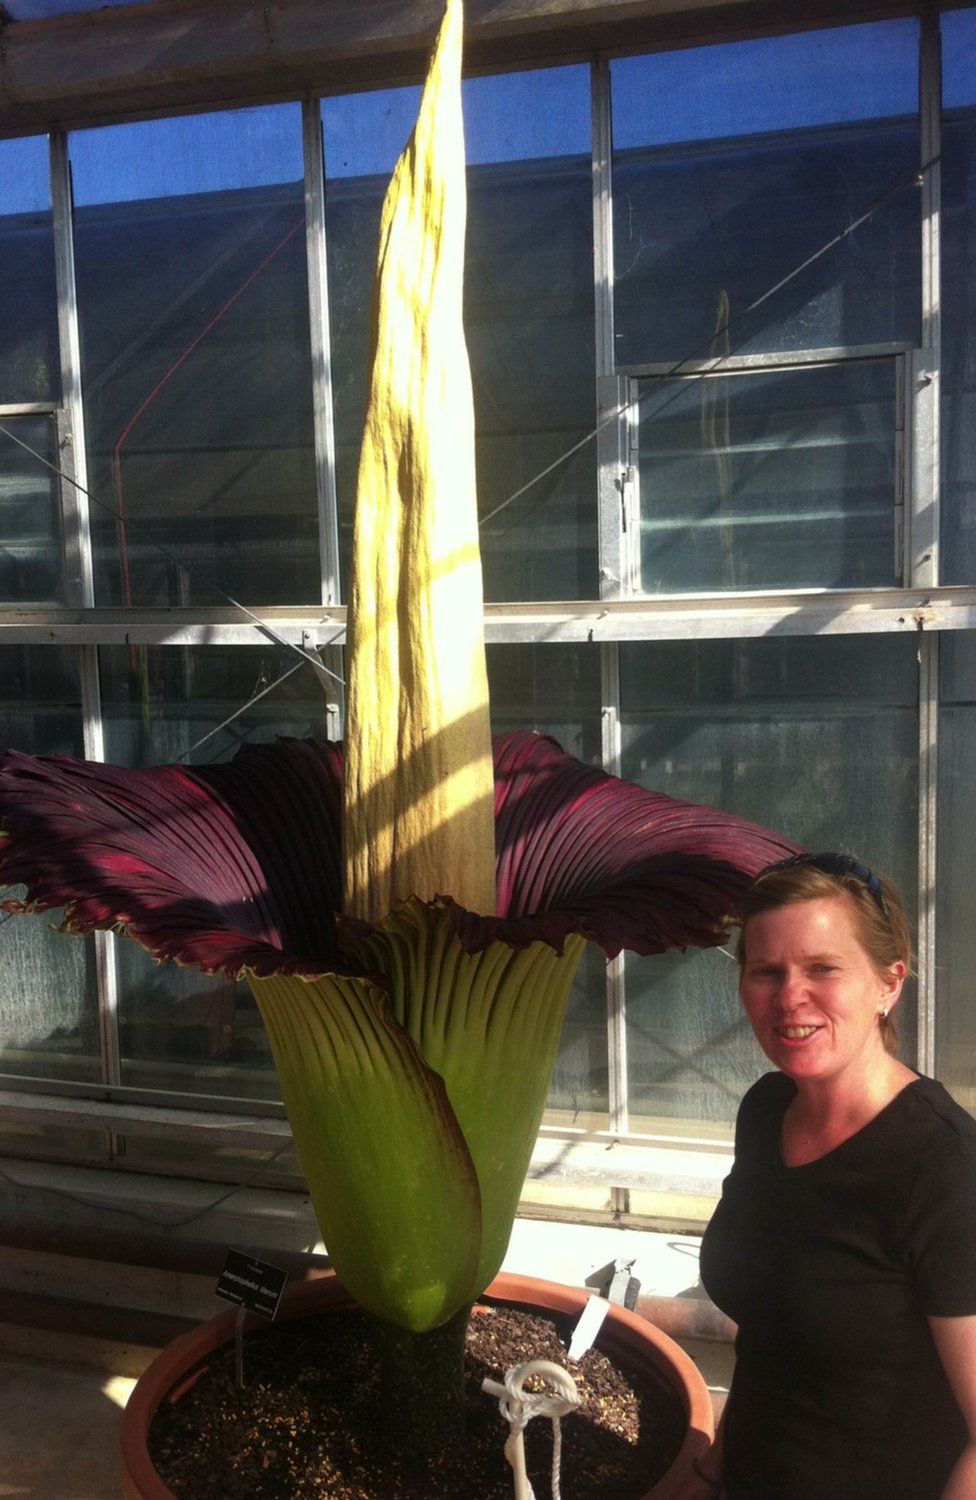 A woman poses next to the corpse flower